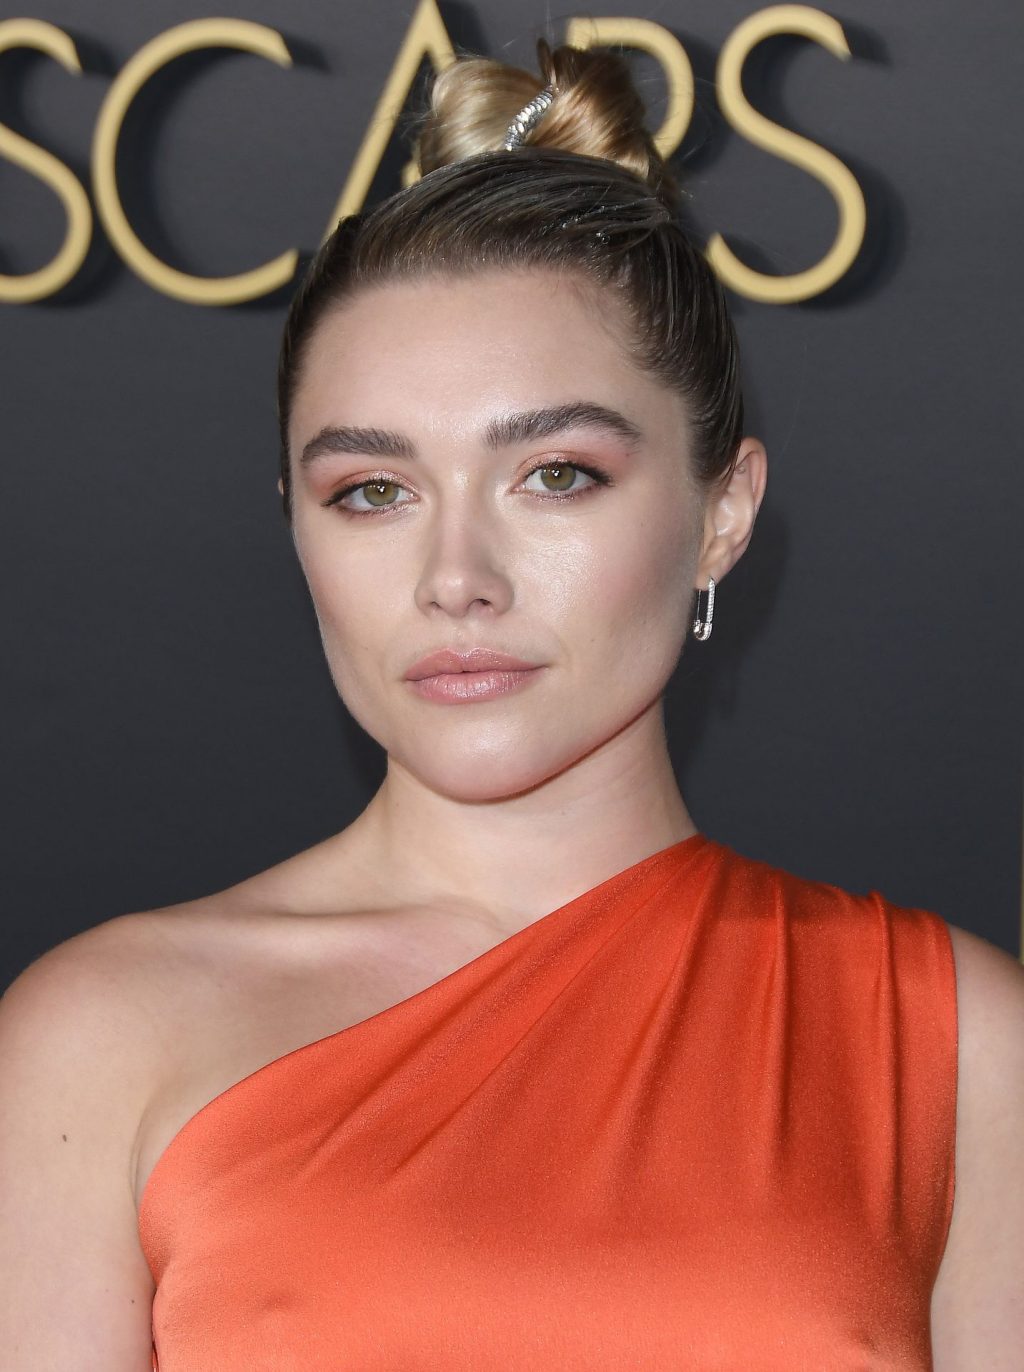 Florence Pugh Shows Her Pokies at the 92nd Academy Awards Nominees Luncheon (48 Photos)